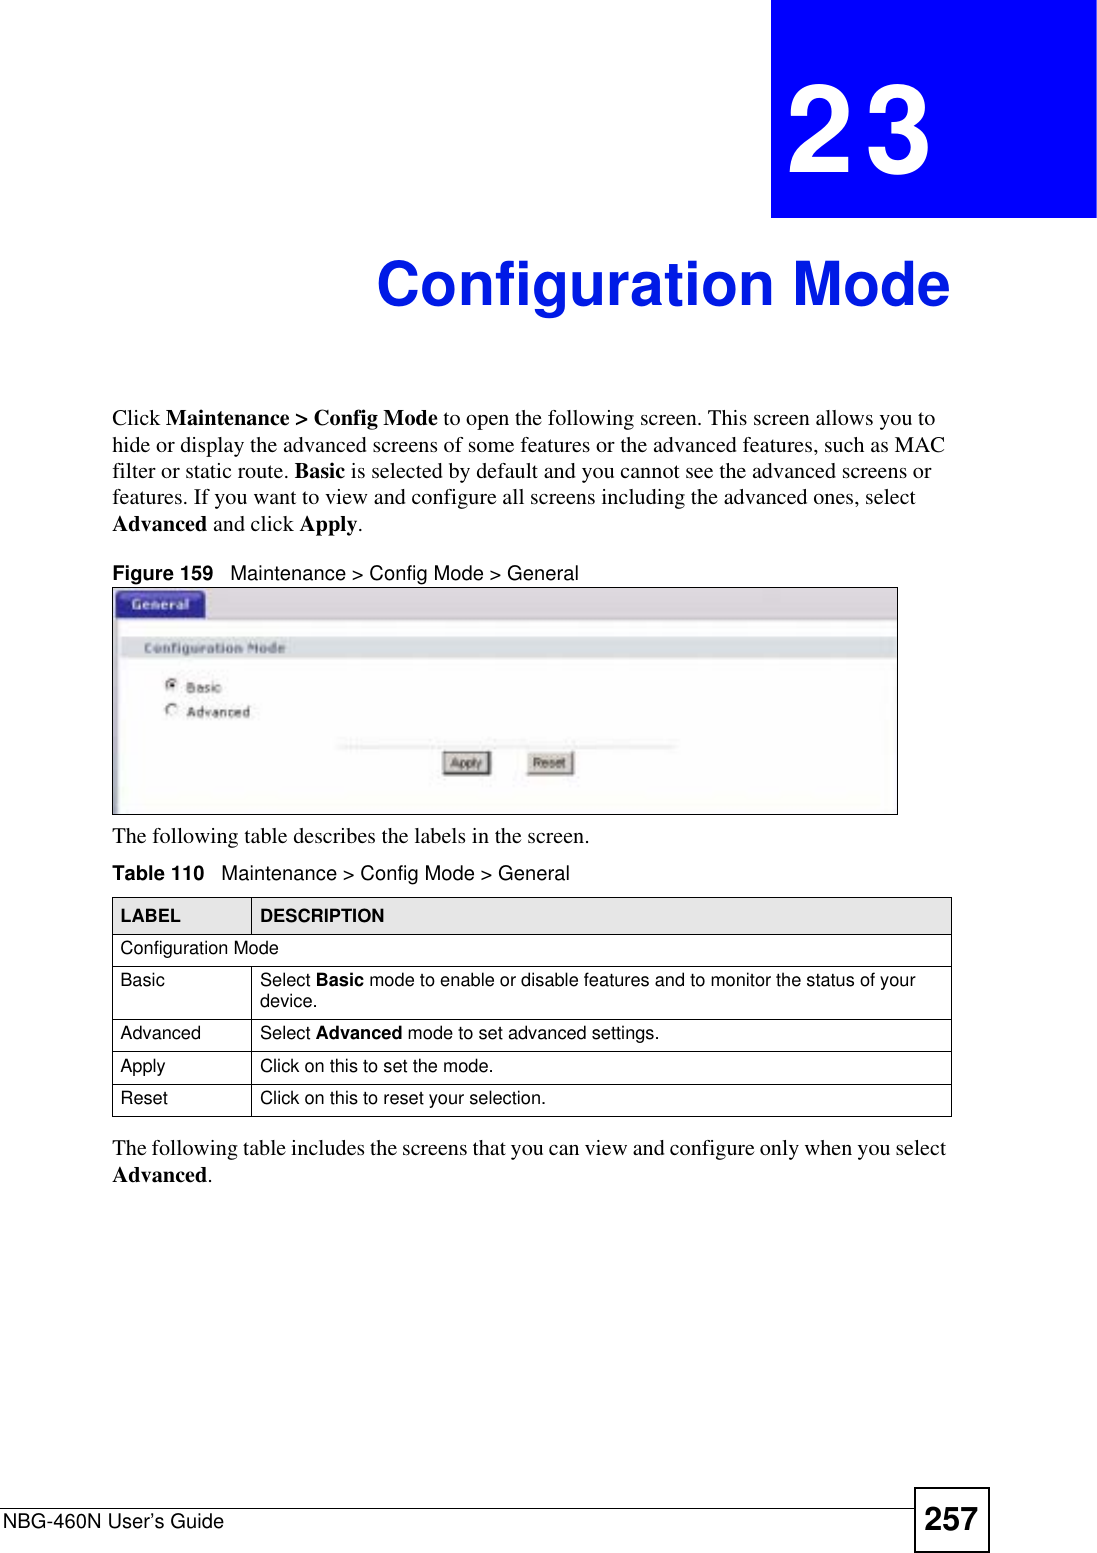 NBG-460N User’s Guide 257CHAPTER 23Configuration ModeClick Maintenance &gt; Config Mode to open the following screen. This screen allows you to hide or display the advanced screens of some features or the advanced features, such as MAC filter or static route. Basic is selected by default and you cannot see the advanced screens or features. If you want to view and configure all screens including the advanced ones, select Advanced and click Apply.Figure 159   Maintenance &gt; Config Mode &gt; General The following table describes the labels in the screen.Table 110   Maintenance &gt; Config Mode &gt; General The following table includes the screens that you can view and configure only when you select Advanced.LABEL DESCRIPTIONConfiguration ModeBasic Select Basic mode to enable or disable features and to monitor the status of your device.Advanced Select Advanced mode to set advanced settings.Apply Click on this to set the mode.Reset Click on this to reset your selection.